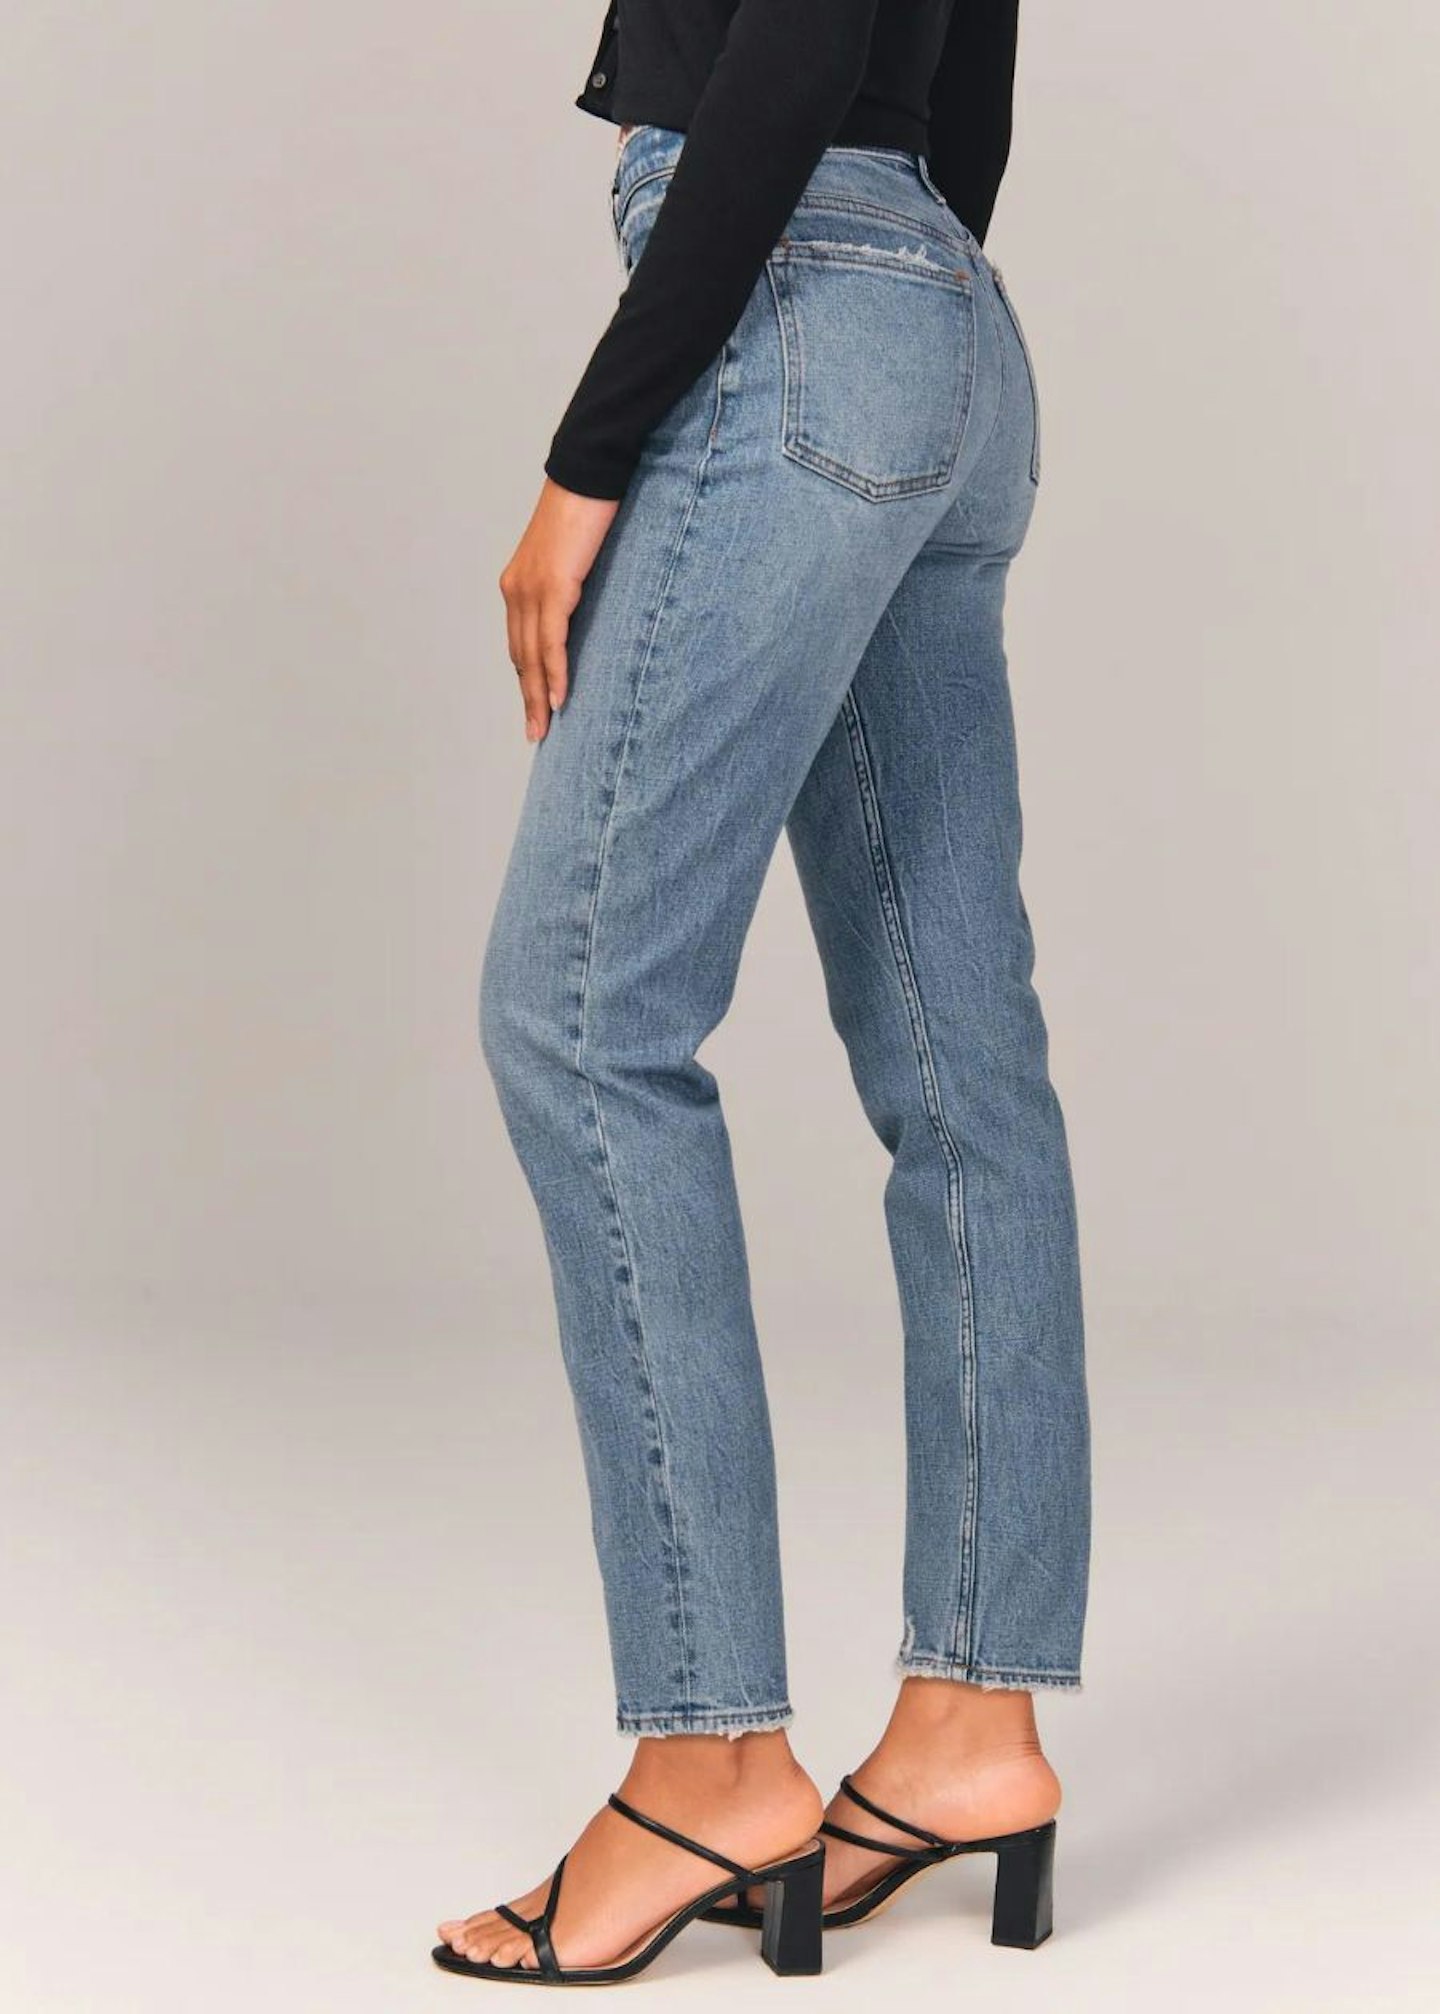 Best Mom Jeans 2022